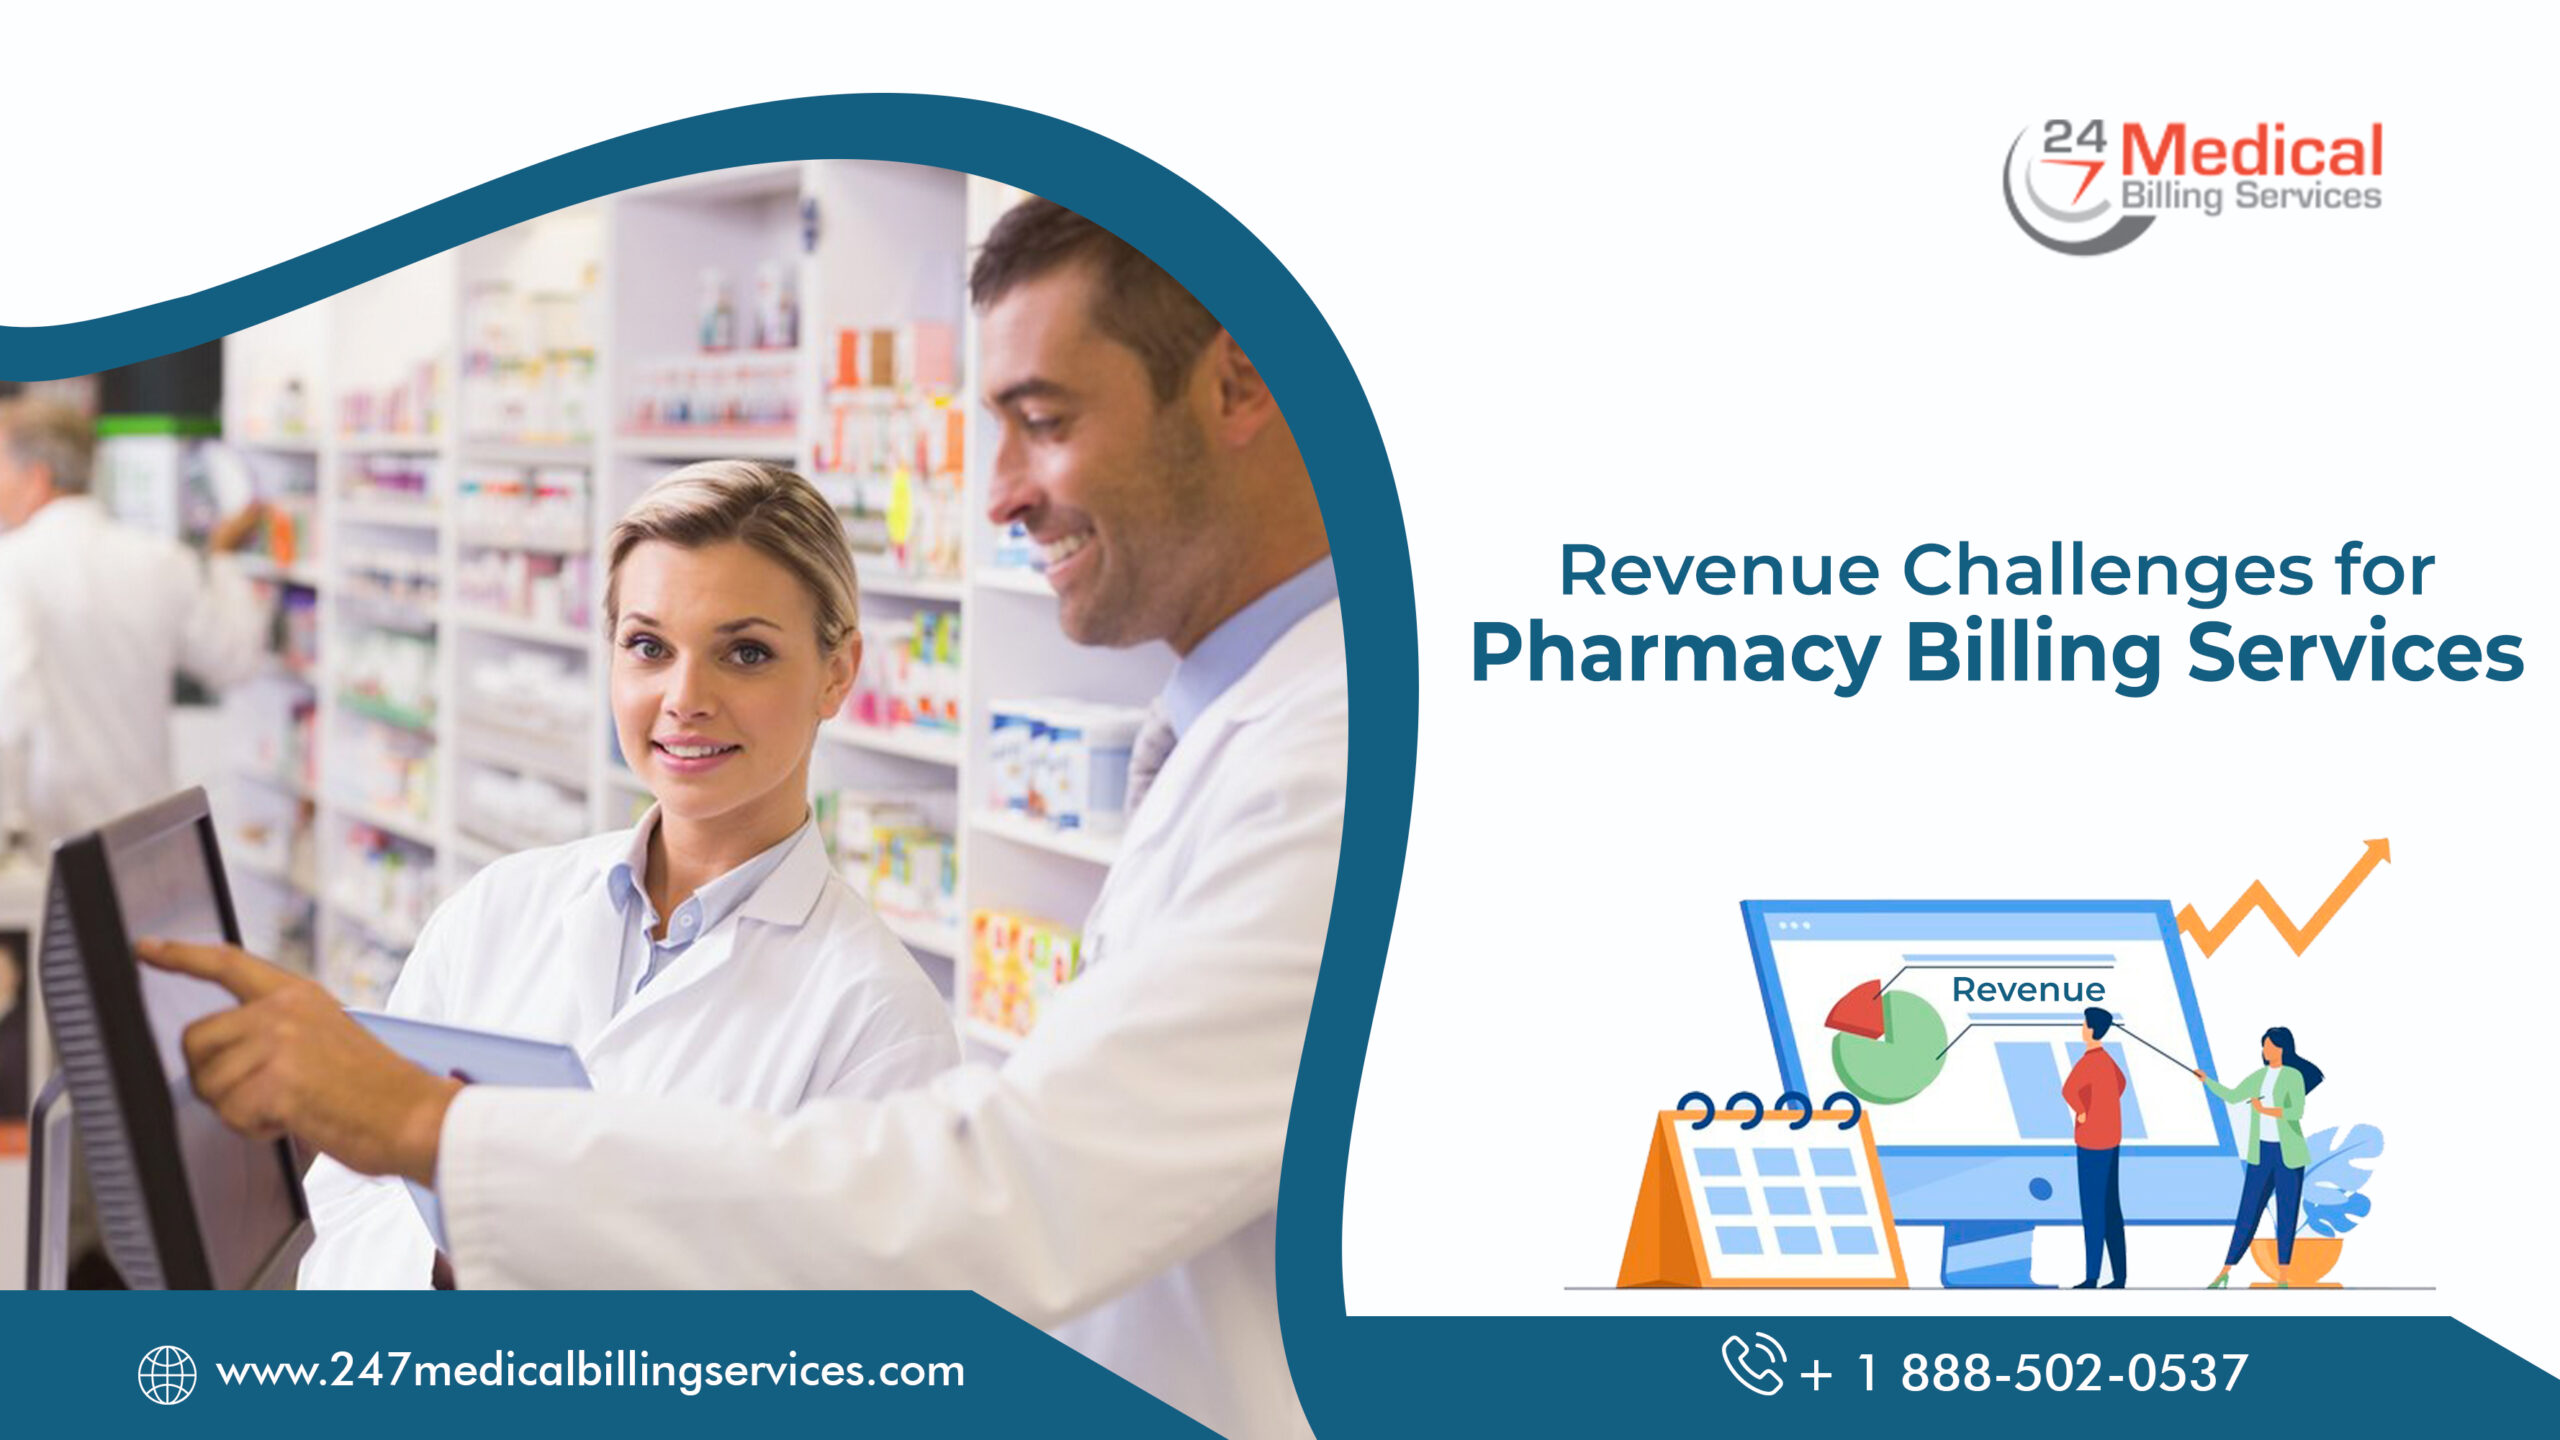  Revenue Challenges in Pharmacy Billing Services